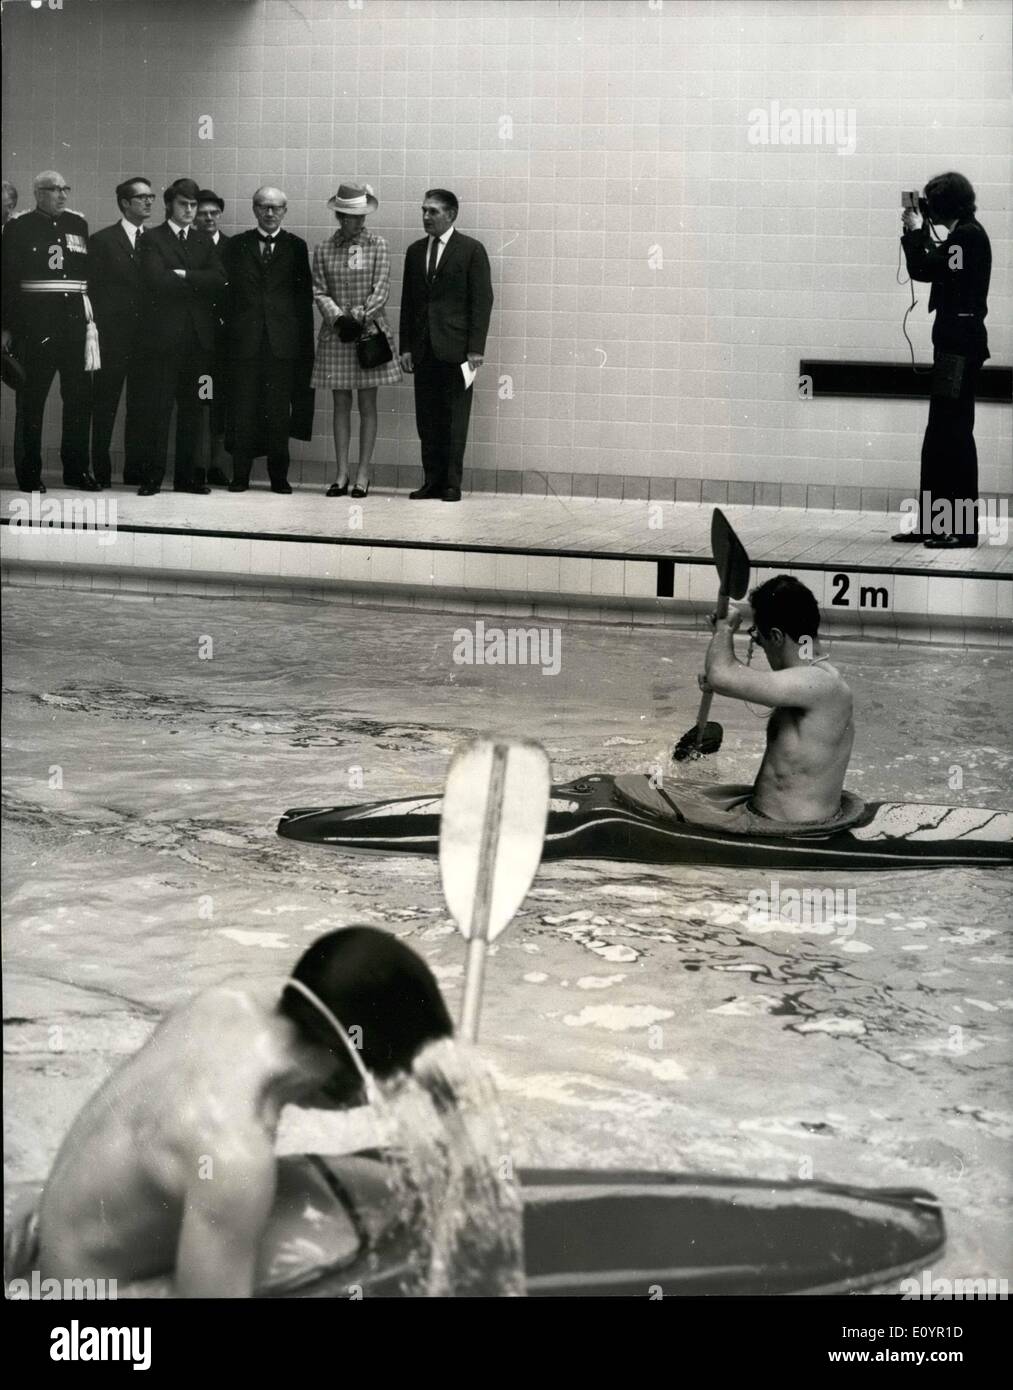 Mar. 03, 1971 - Princess Anne in Manchester: During her visit to Manchester yesterday Princess Anne opened the new Sports Hall and Swimming Pool at Didebury College of Education. Photo shows Princess Anne seen watching a canoeing demonstration, at the new swimming pool yesterday. Stock Photo